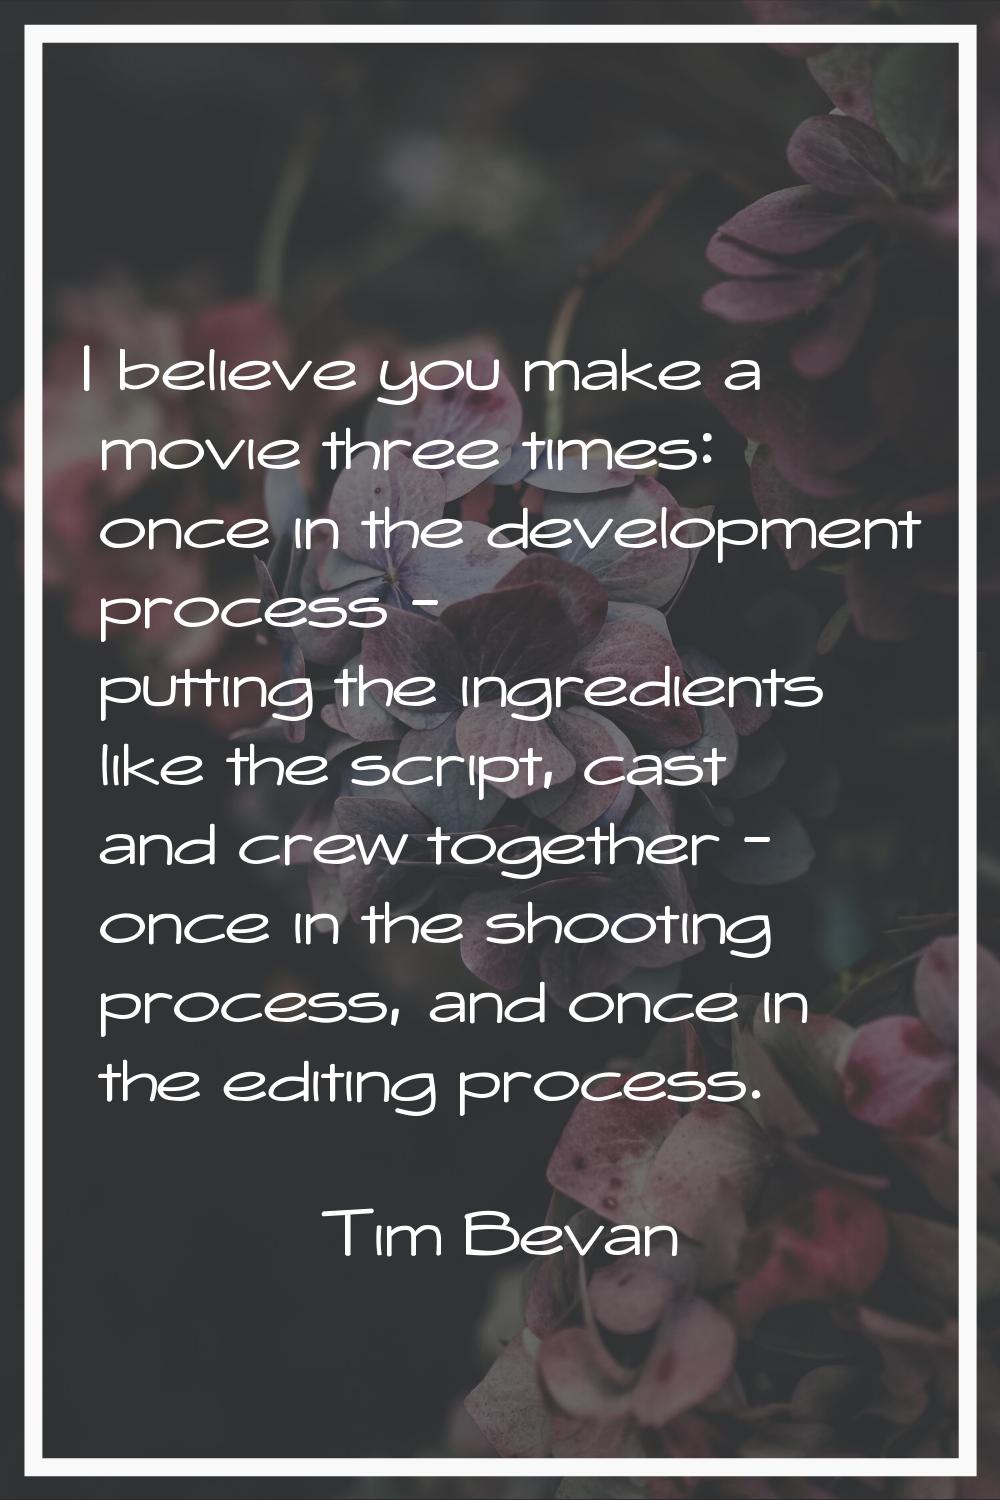 I believe you make a movie three times: once in the development process - putting the ingredients l